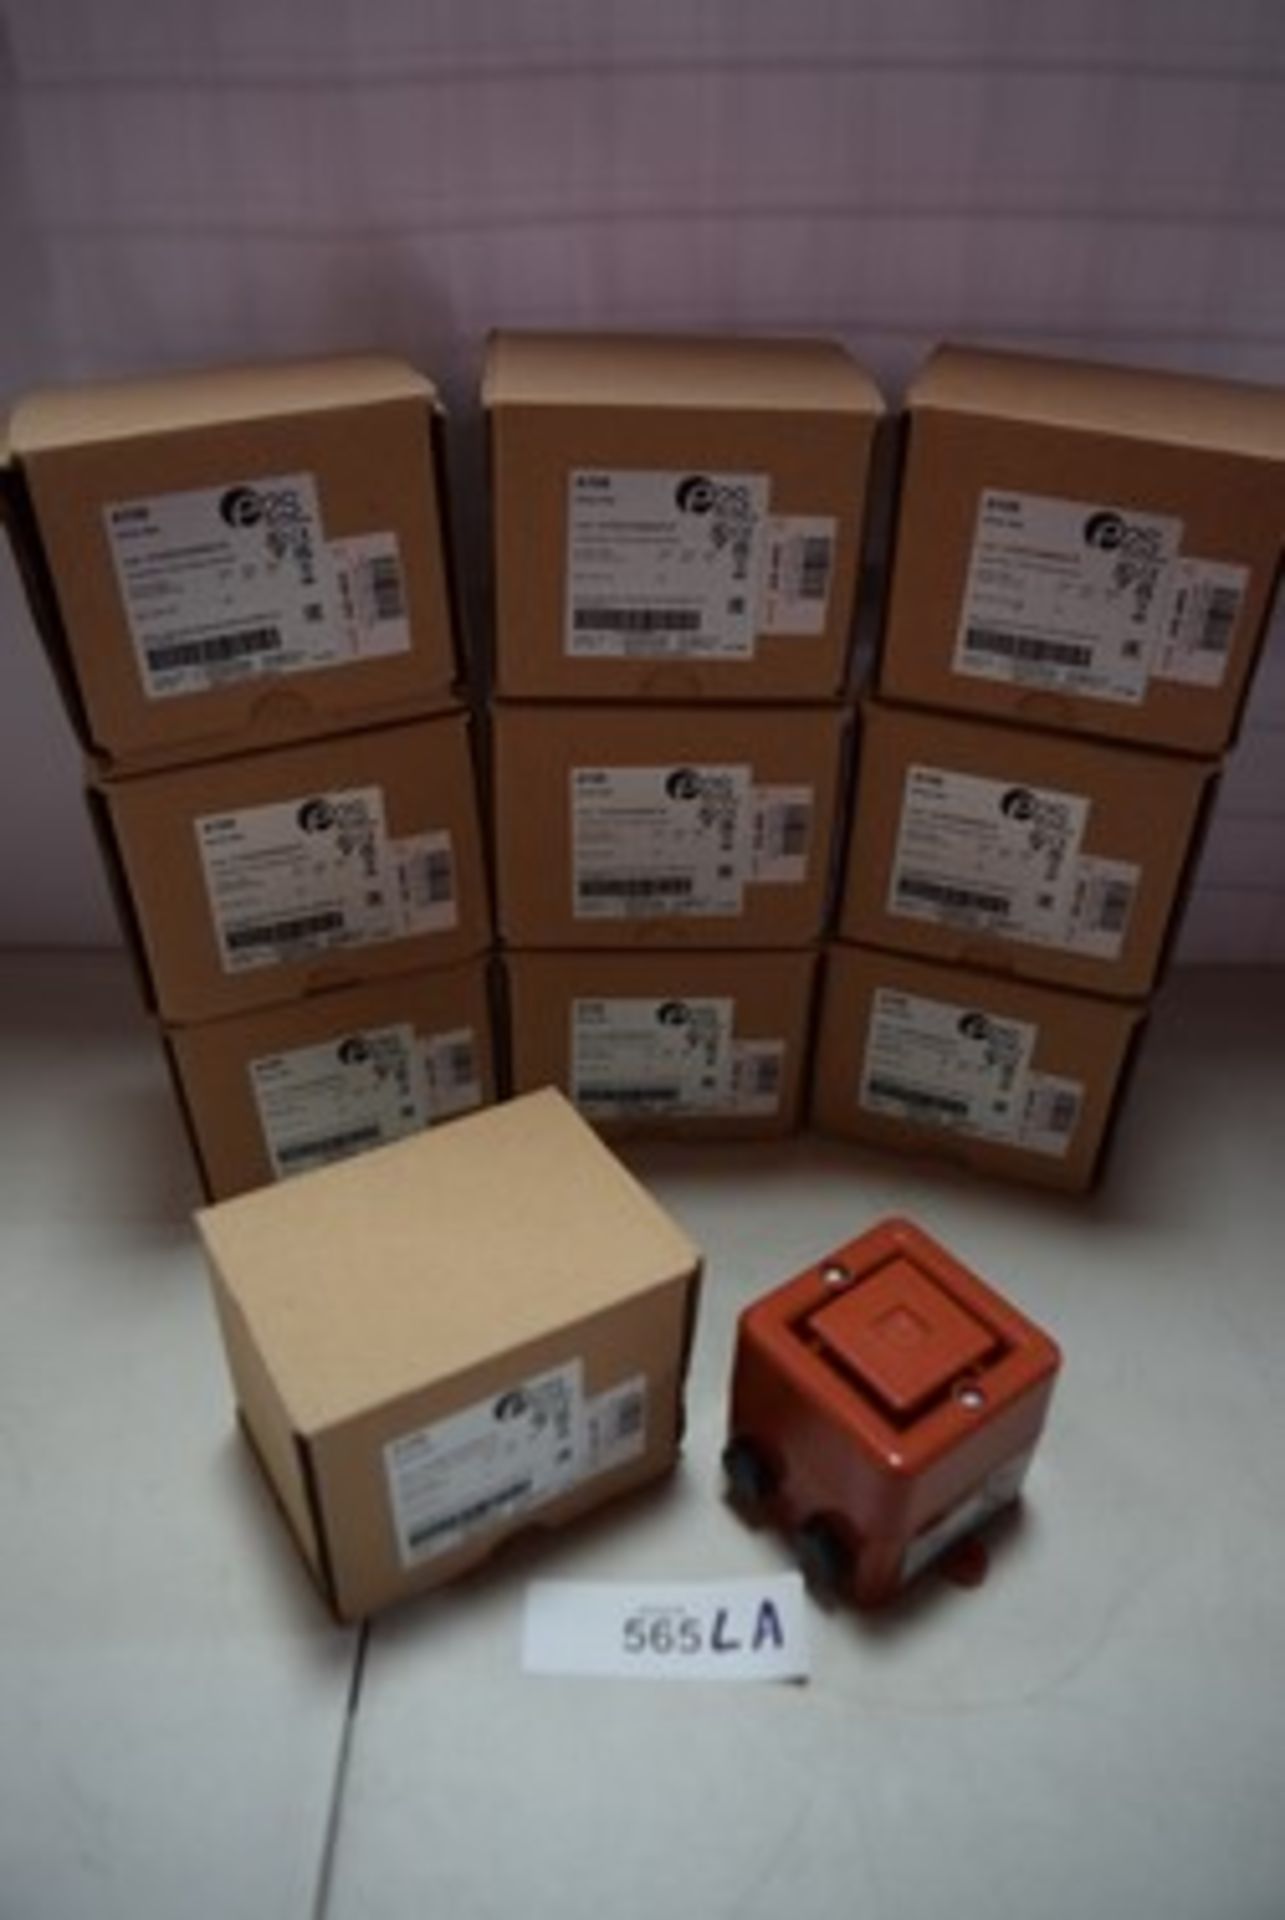 10 x E2S A100 series electronic sounders, item No: A100DC024MA0AIR - new (GS30)